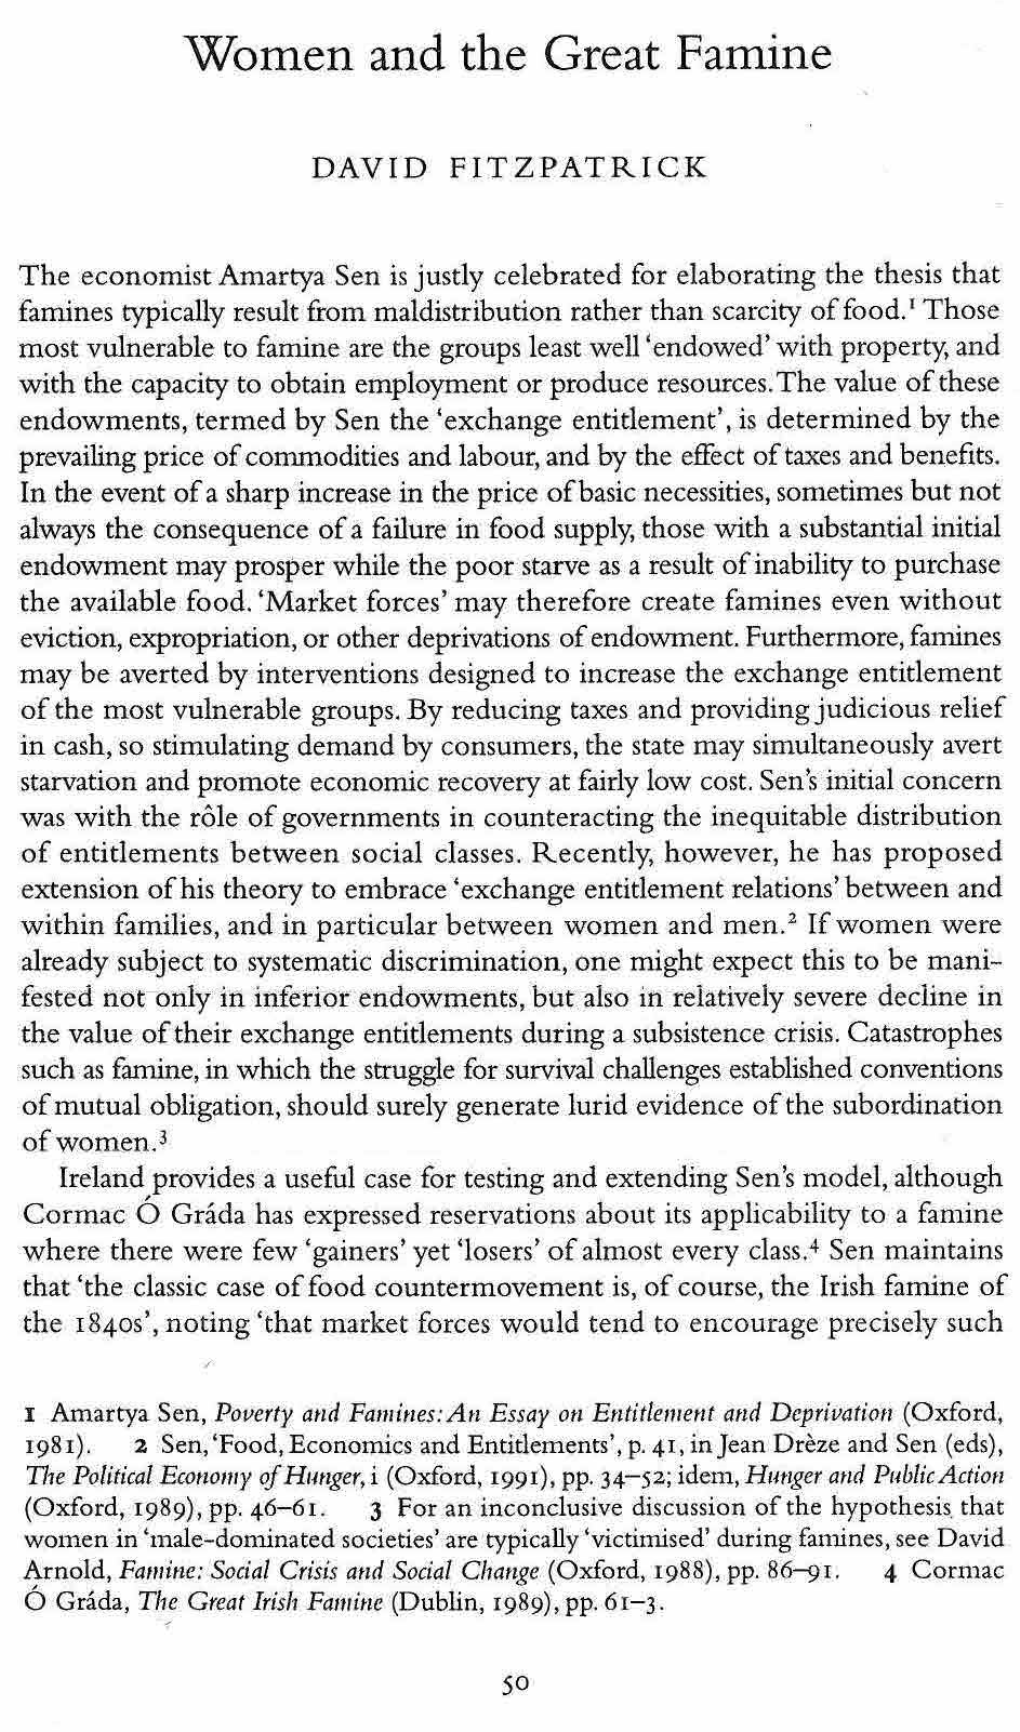 Women and the Great Famine